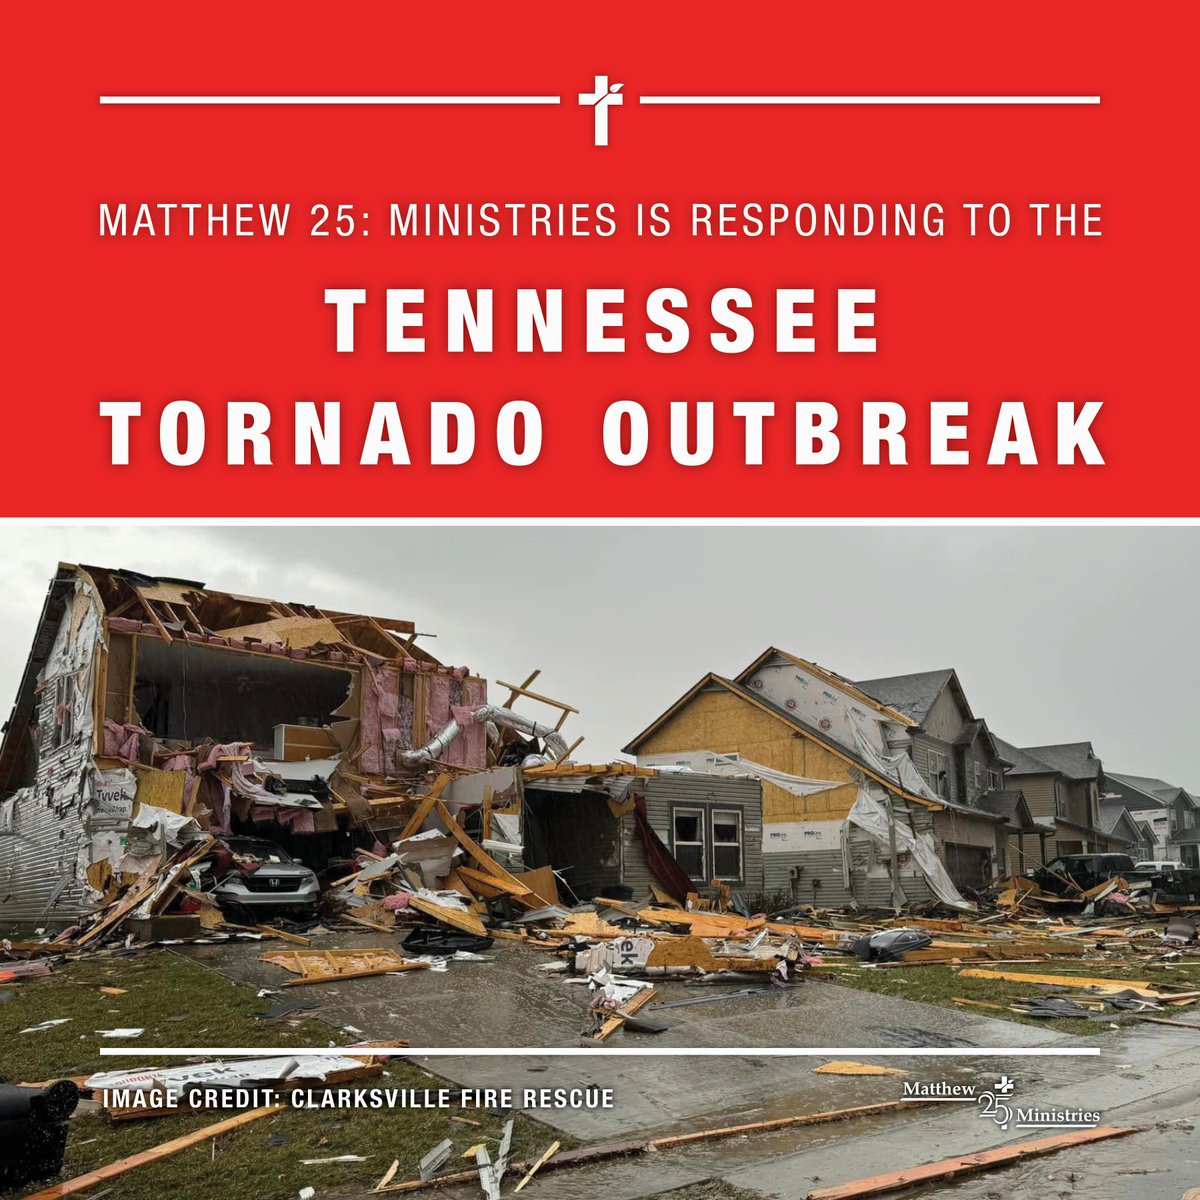 We're responding to tornadoes that ripped through portions of Middle Tennessee yesterday, 12/9. Our team will be deploying tomorrow to provide supplies & services to areas impacted. Visit m25m.org/disaster/tntor… for more details. Our thoughts & prayers are with everyone impacted.